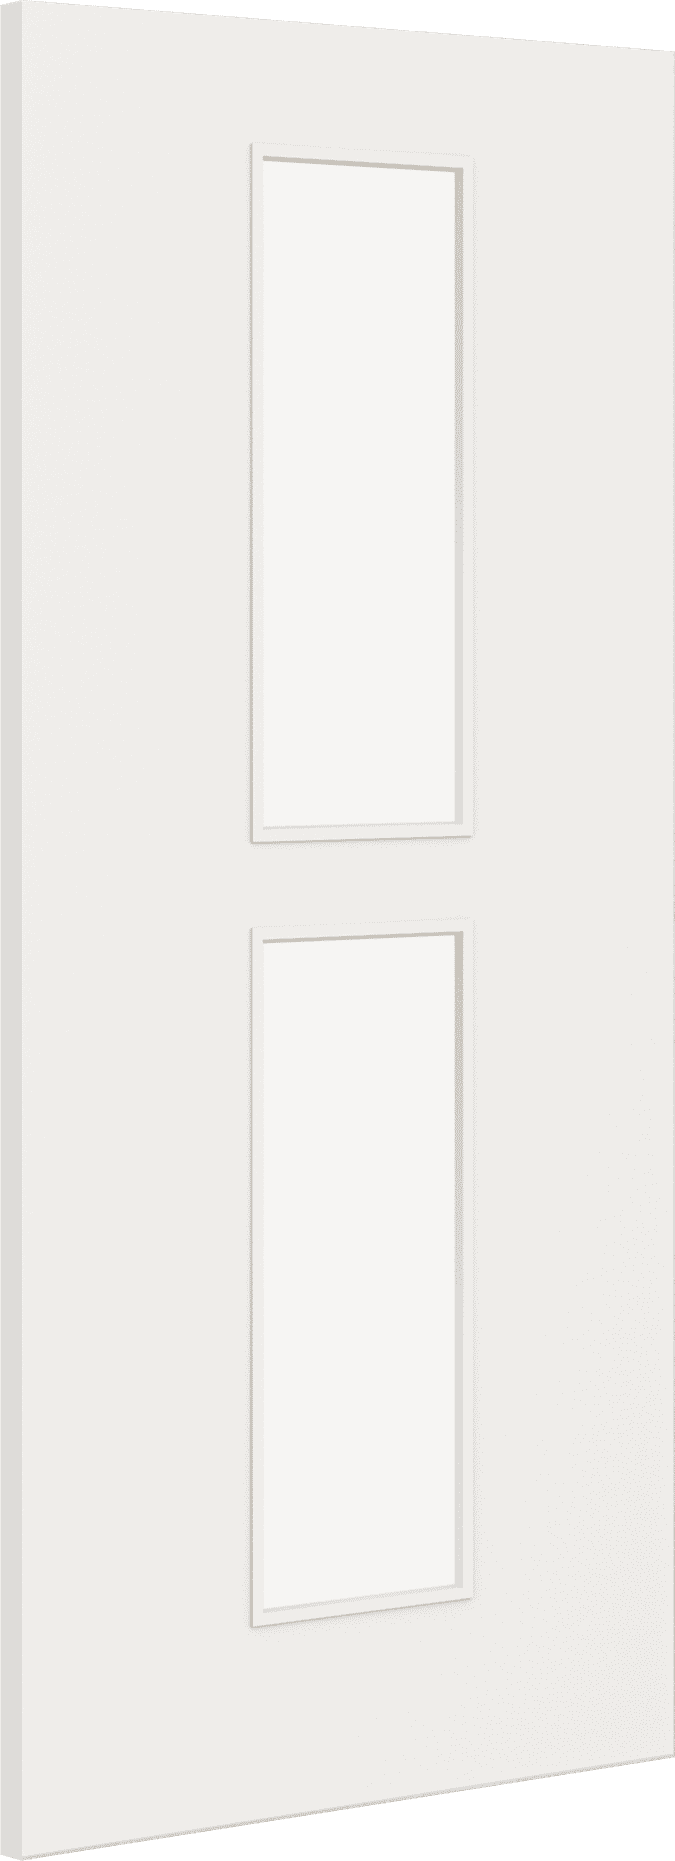 1981mm x 914mm x 44mm (36") Architectural Paint Grade White 12 Frosted Glazed Fire Door Blank